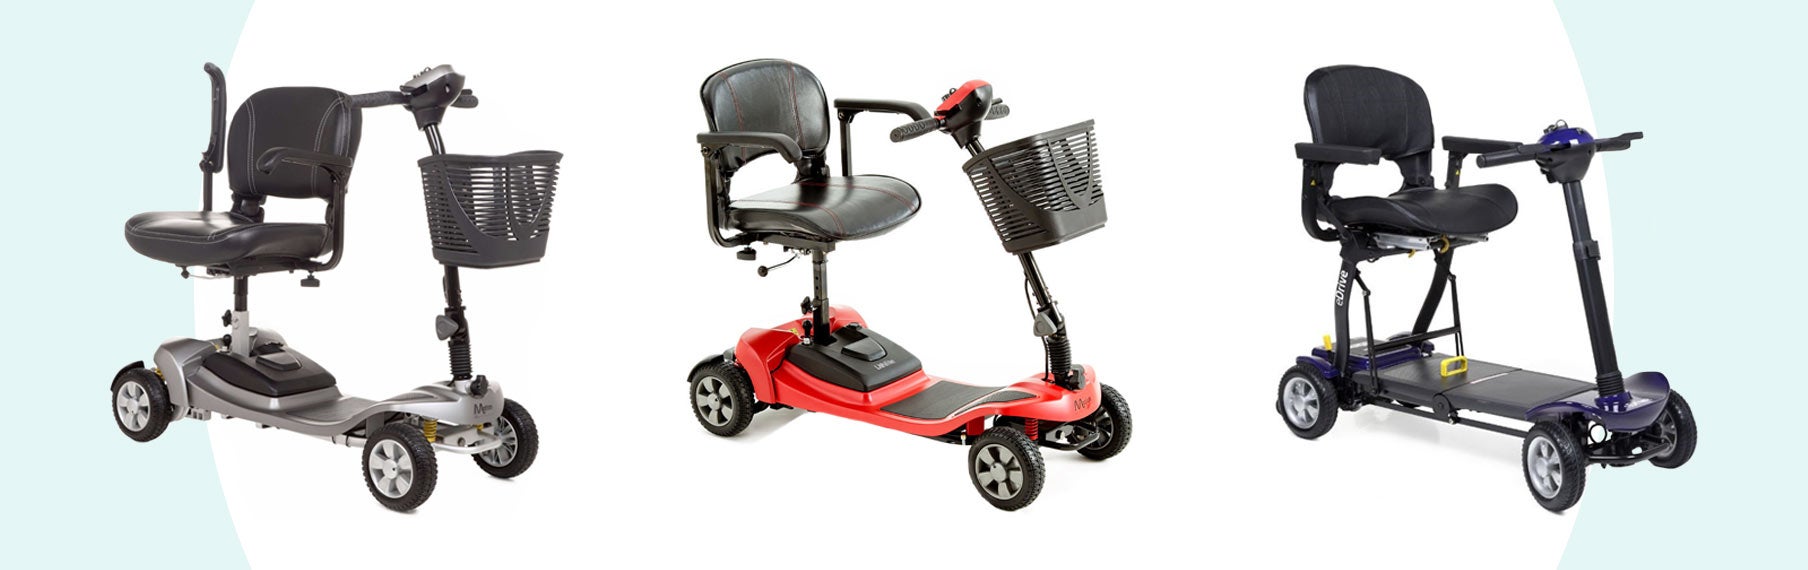 Mobility Aids - Buy Online - Complete Care Shop